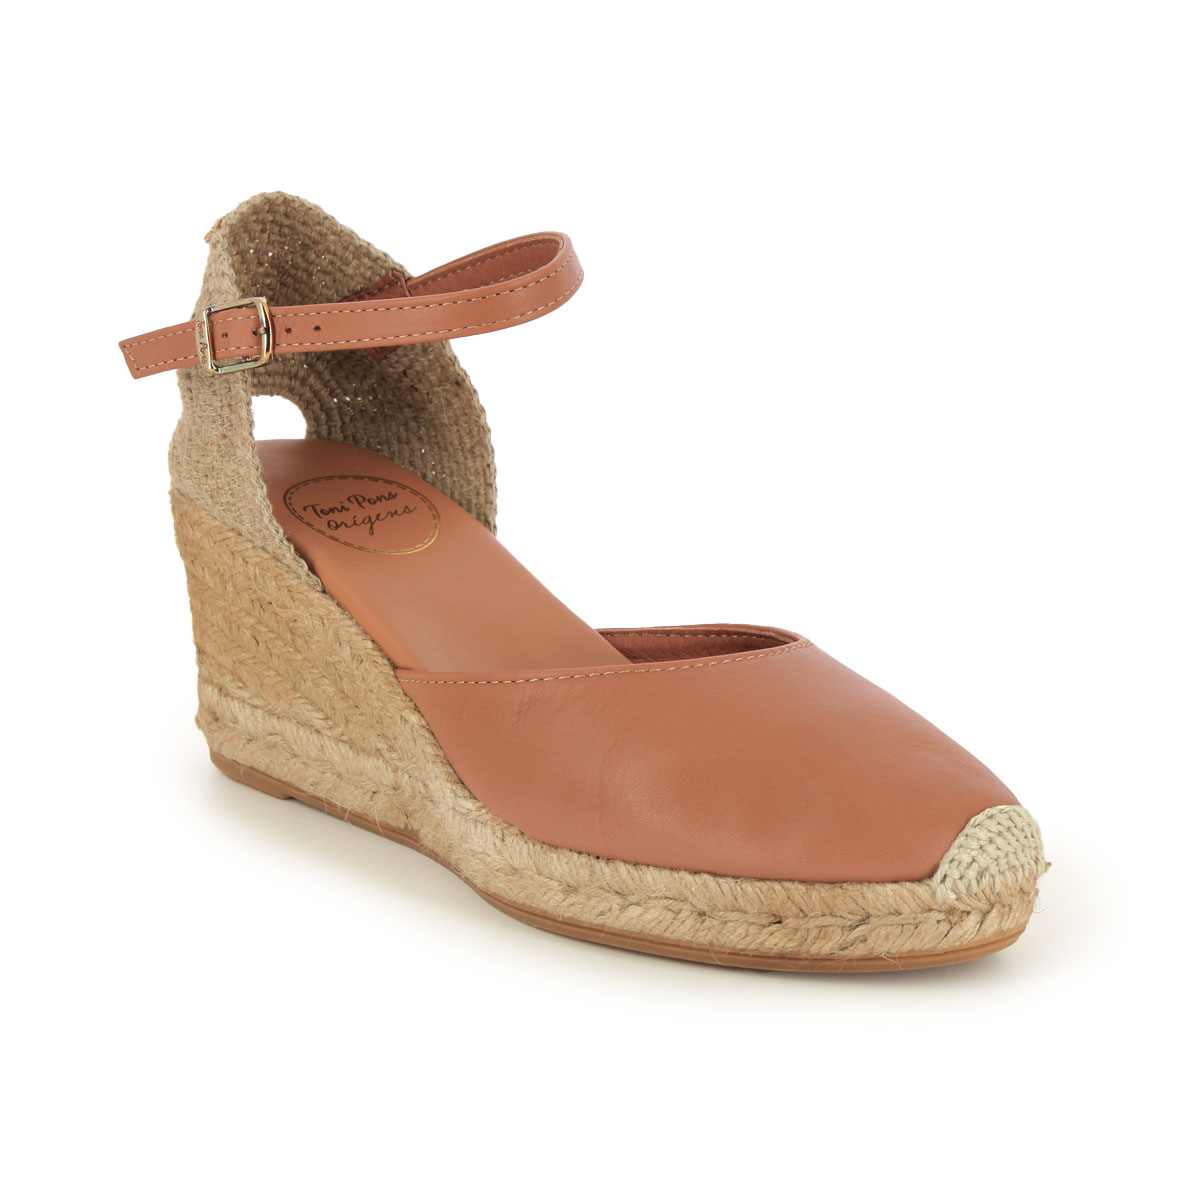 Toni Pons Costa 5 Lloret Tan Leather Womens Espadrilles 4002-11 in a Plain Leather and Textile in Size 36